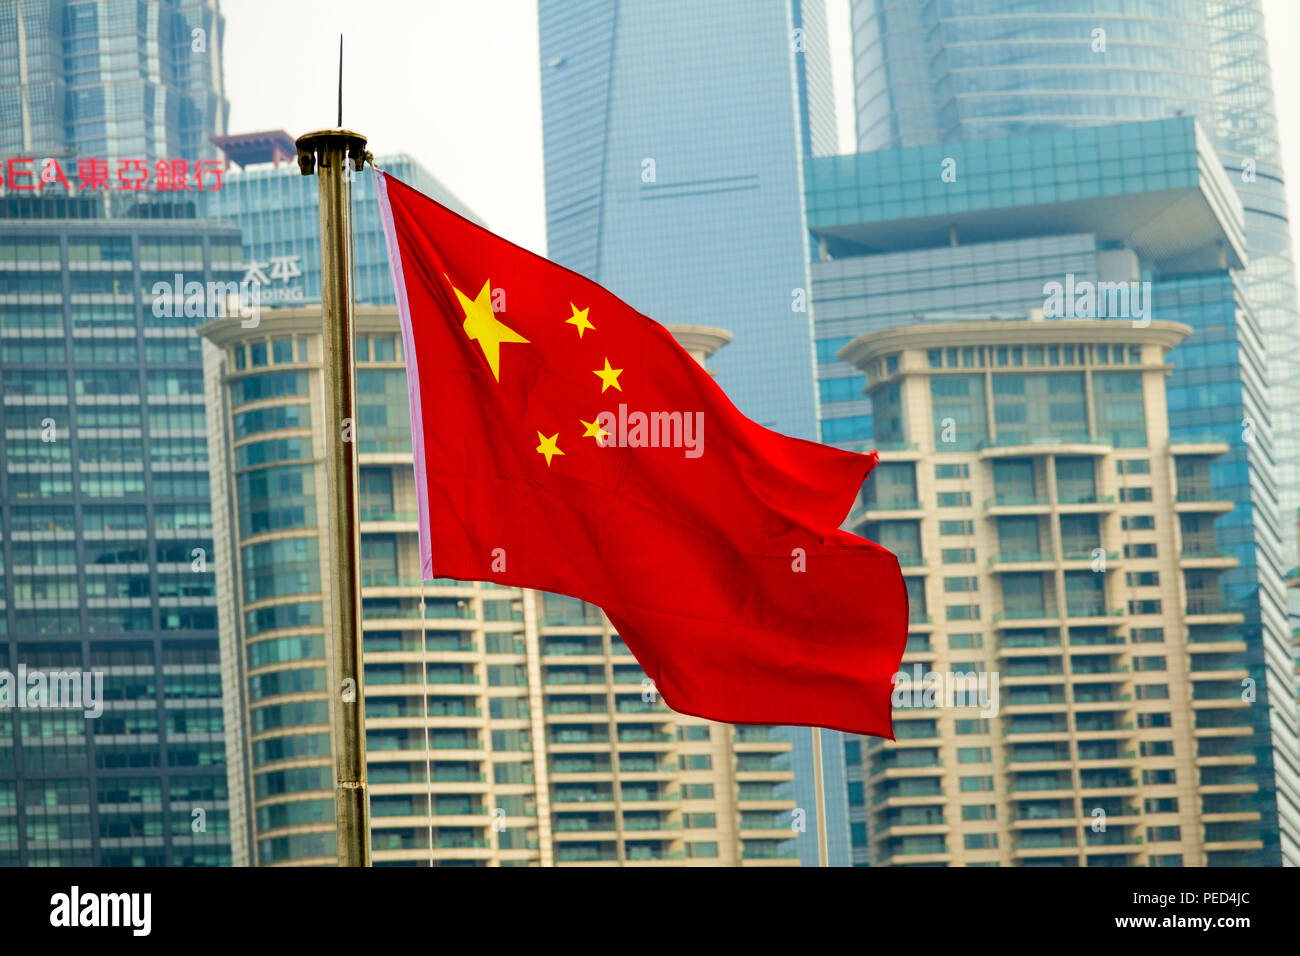 Flag of People's Republic of China in Shanghai Communist Party with Skyline in background Stock Photo